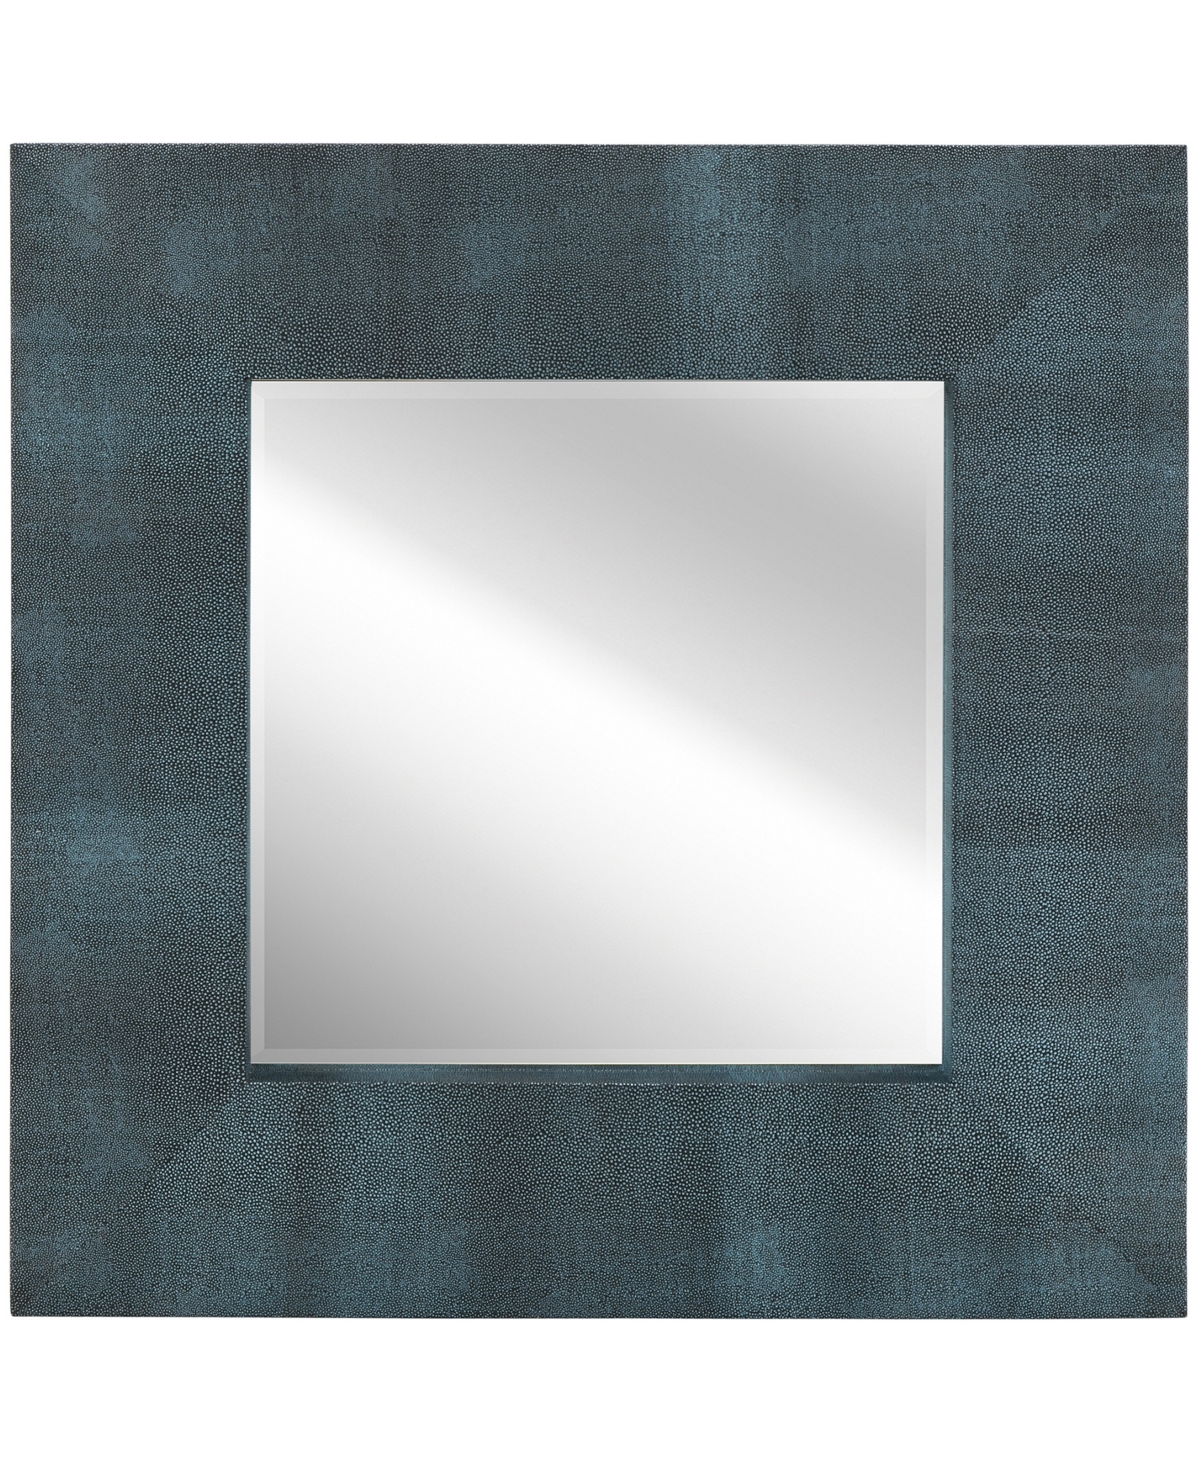 Beveled Wall Mirror Metallic Faux Shagreen Leather Framed Leaner, 30" x 30" x 3" - Blue